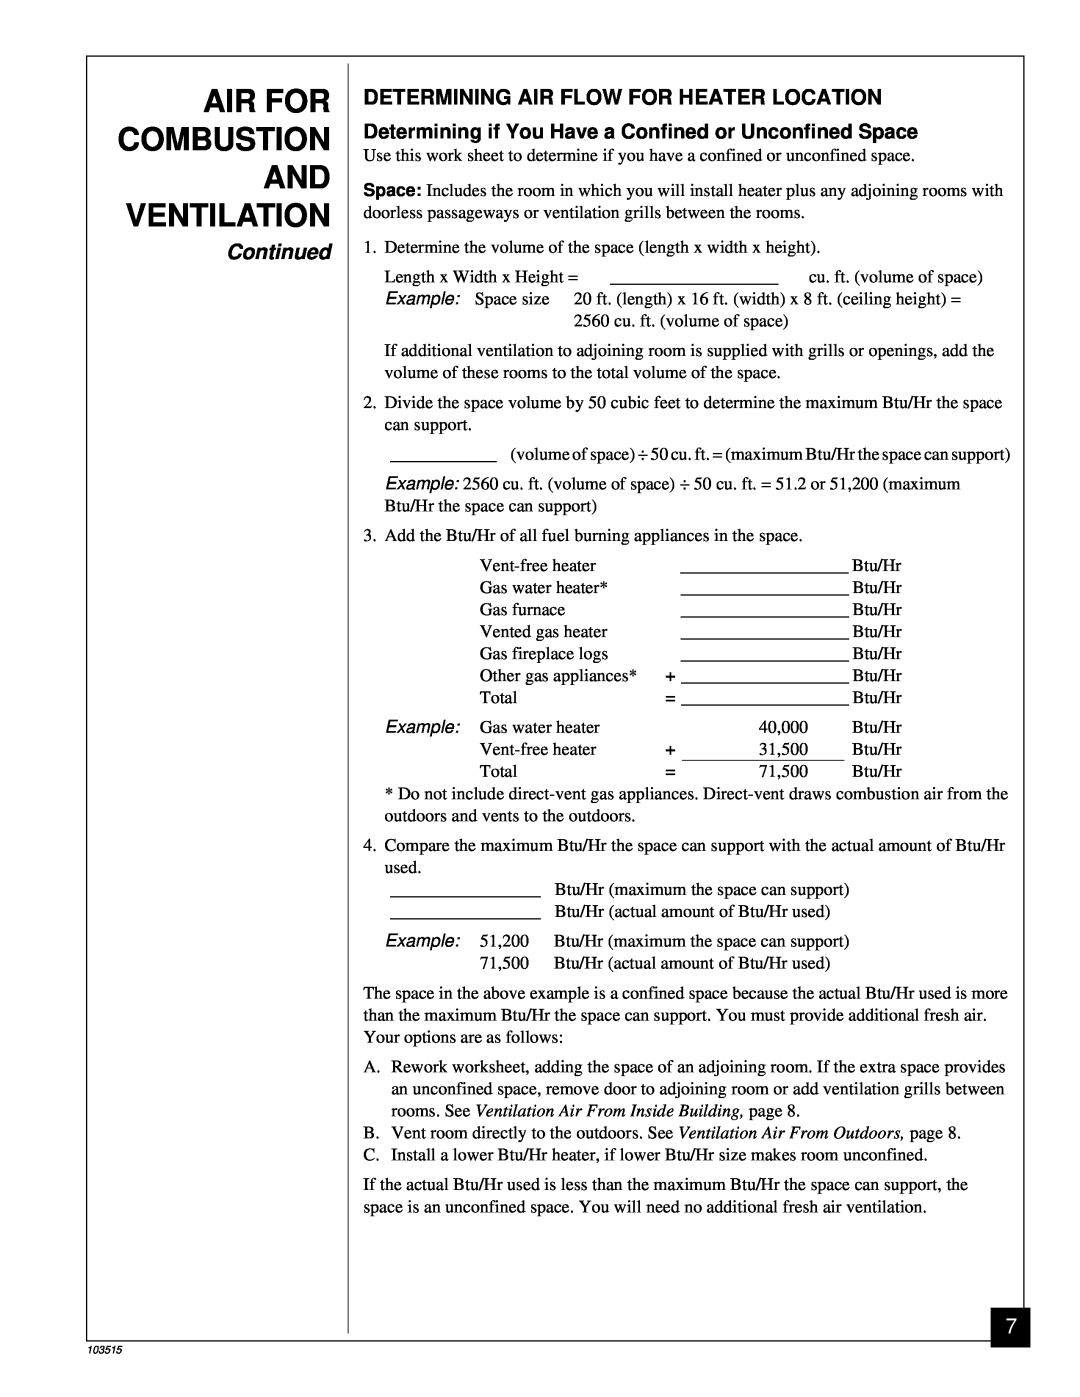 Vanguard Heating Gas Log Heater Determining Air Flow For Heater Location, Air For Combustion And Ventilation, Continued 